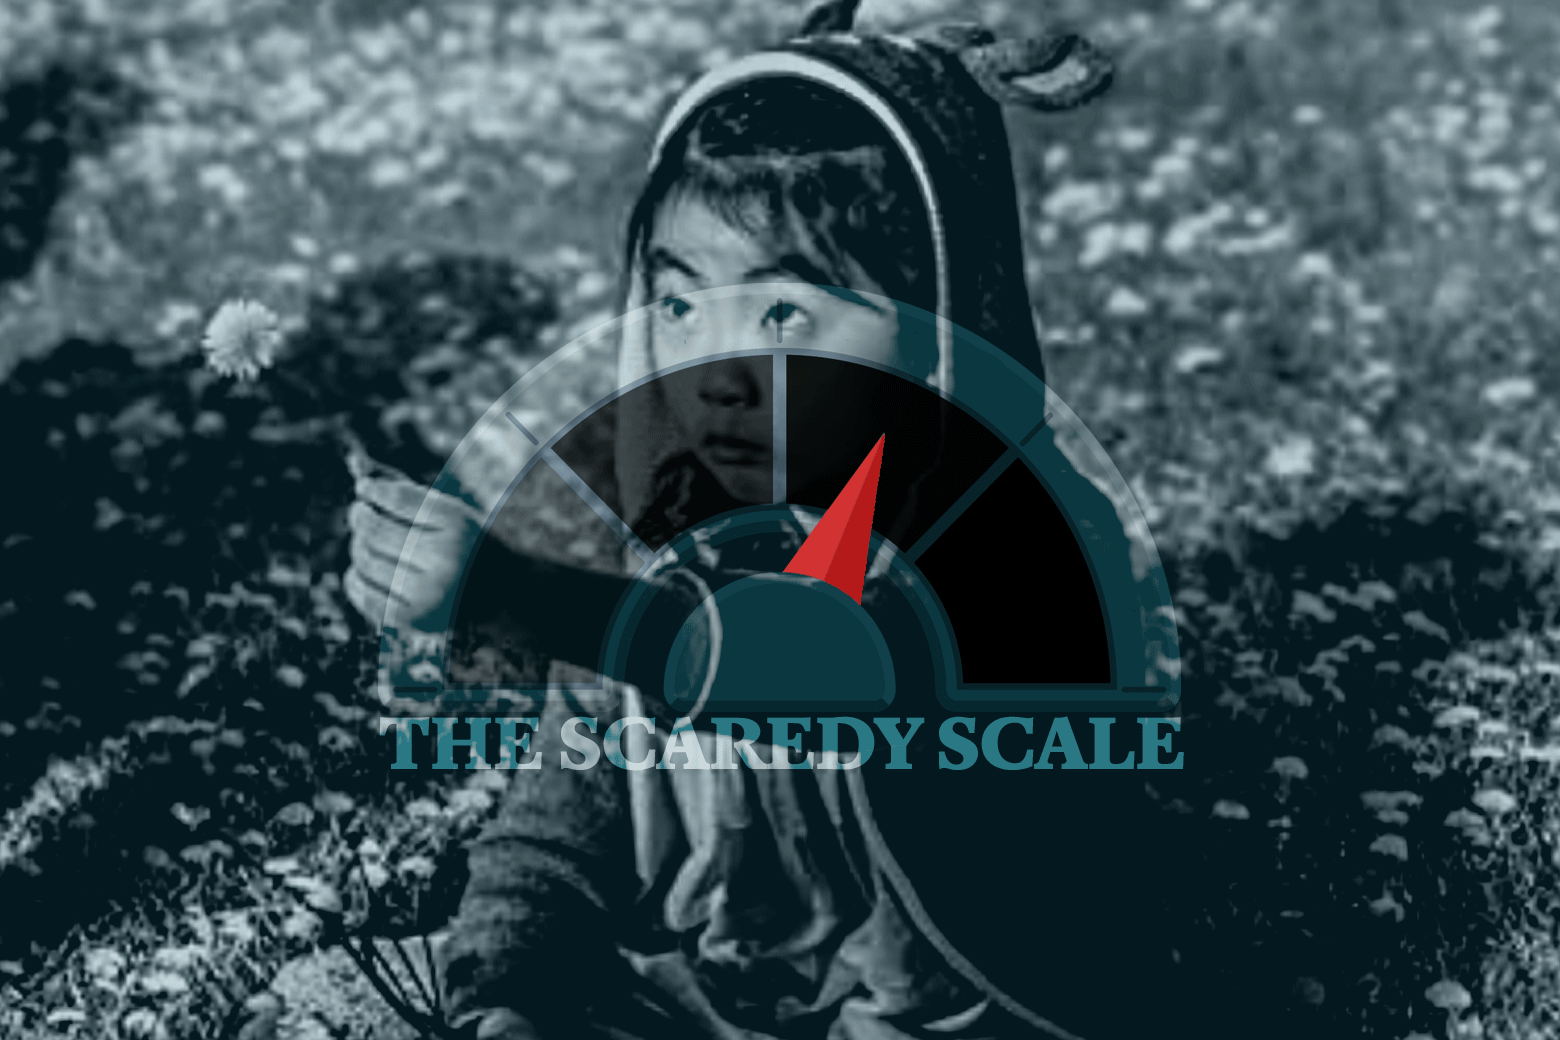 A young Asian girl wearing what looks like bear pajamas sits down on the grass, holding up a small flower. In front of her is photoshopped a twitching meter and the words "The Scaredy Scale."